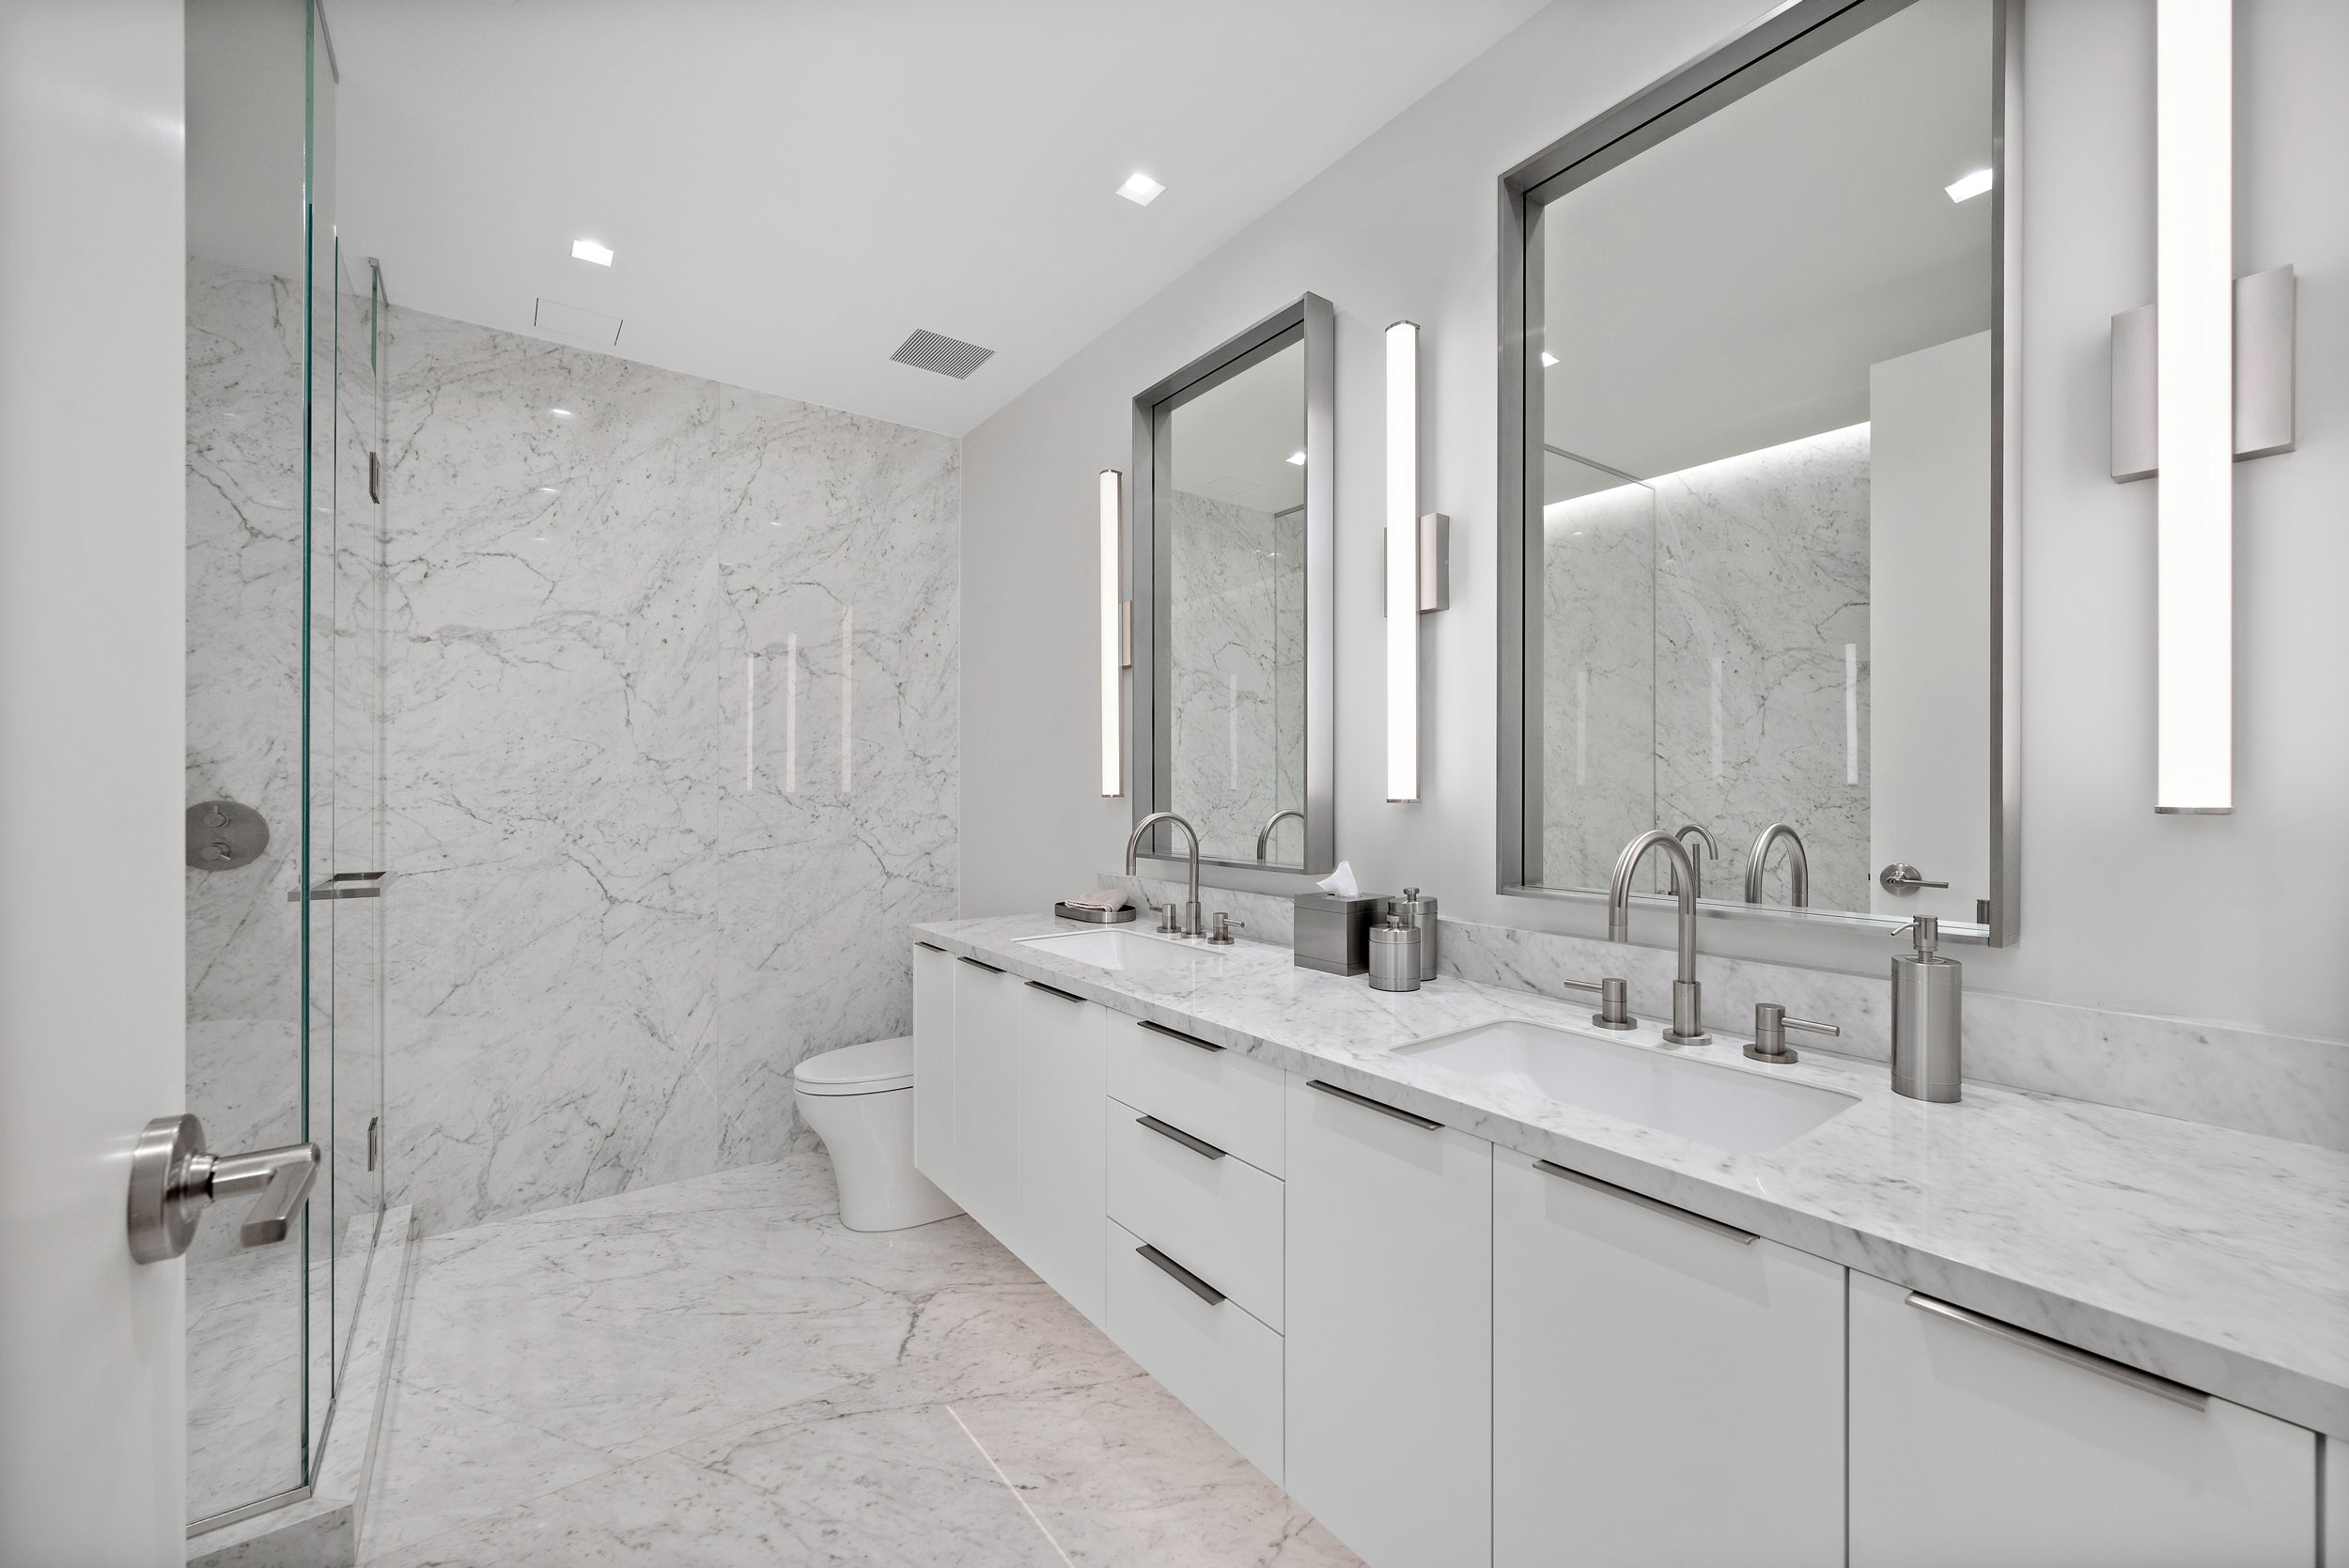 Large-format Porcelain Sintered Stone Shower Wall Cladding, Bathroom Vanity, and Flooring in Bianco Carrara